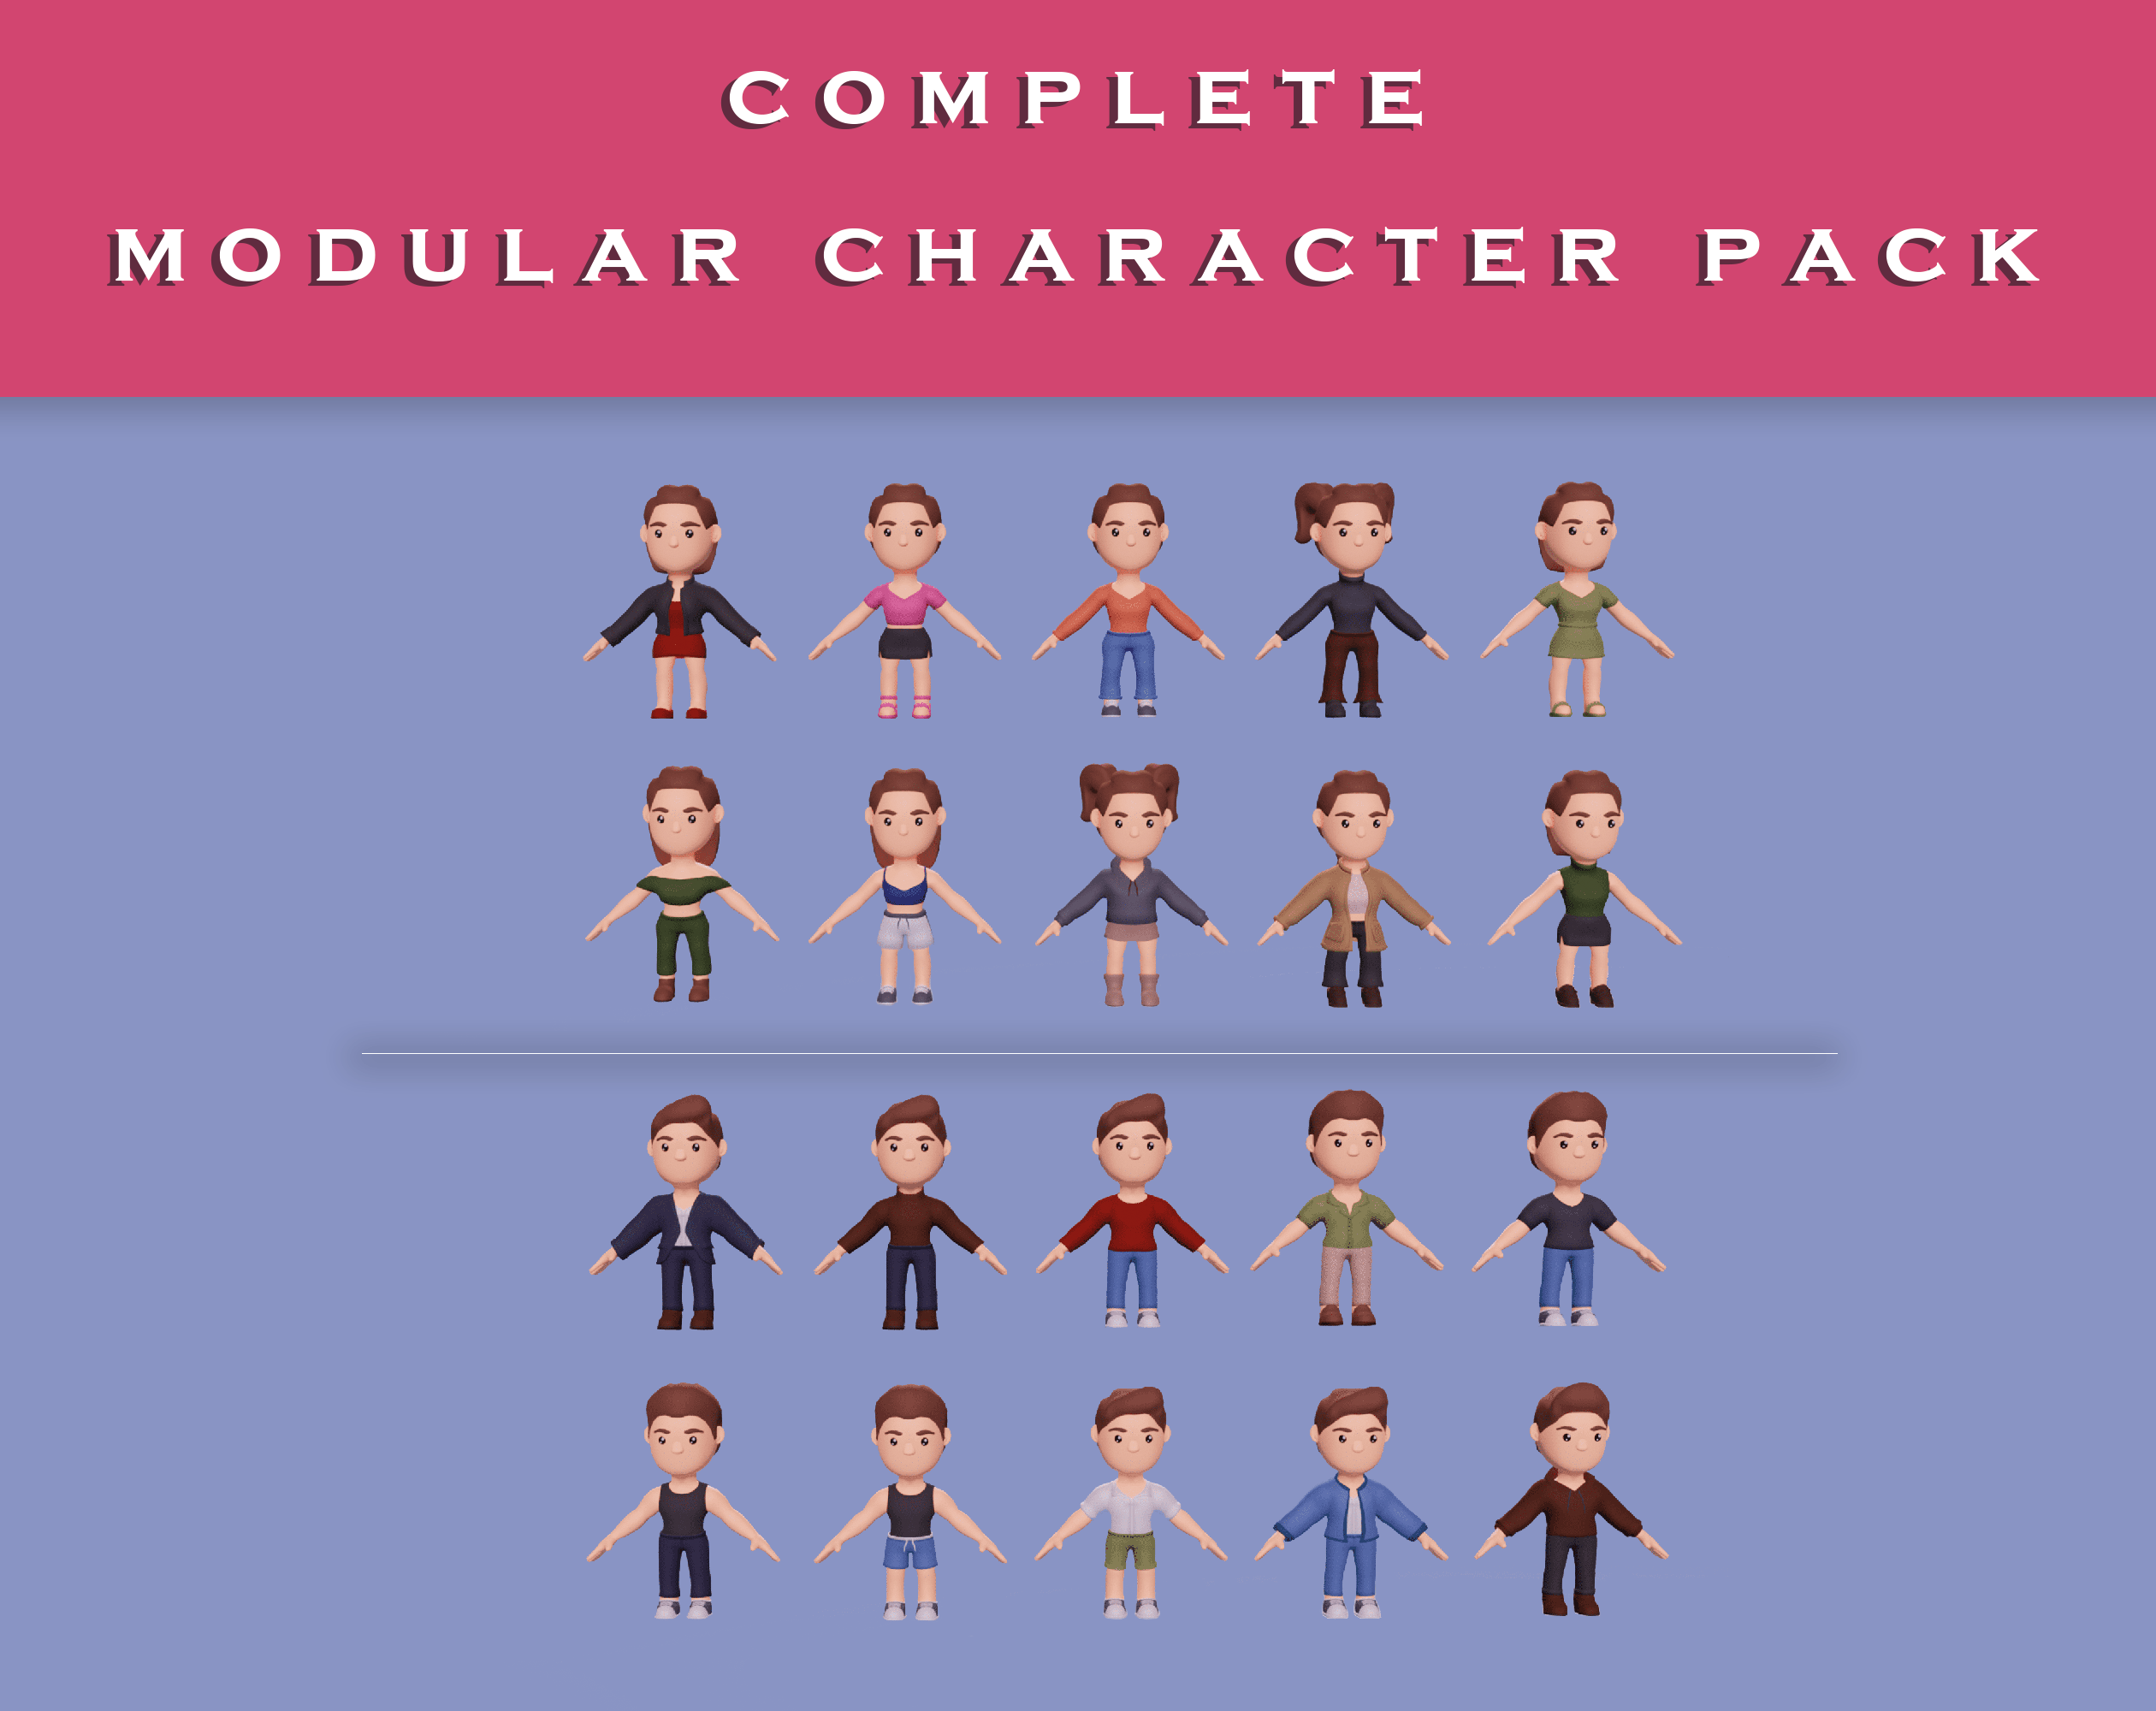 Low Poly Modular Character Assets - Complete Pack